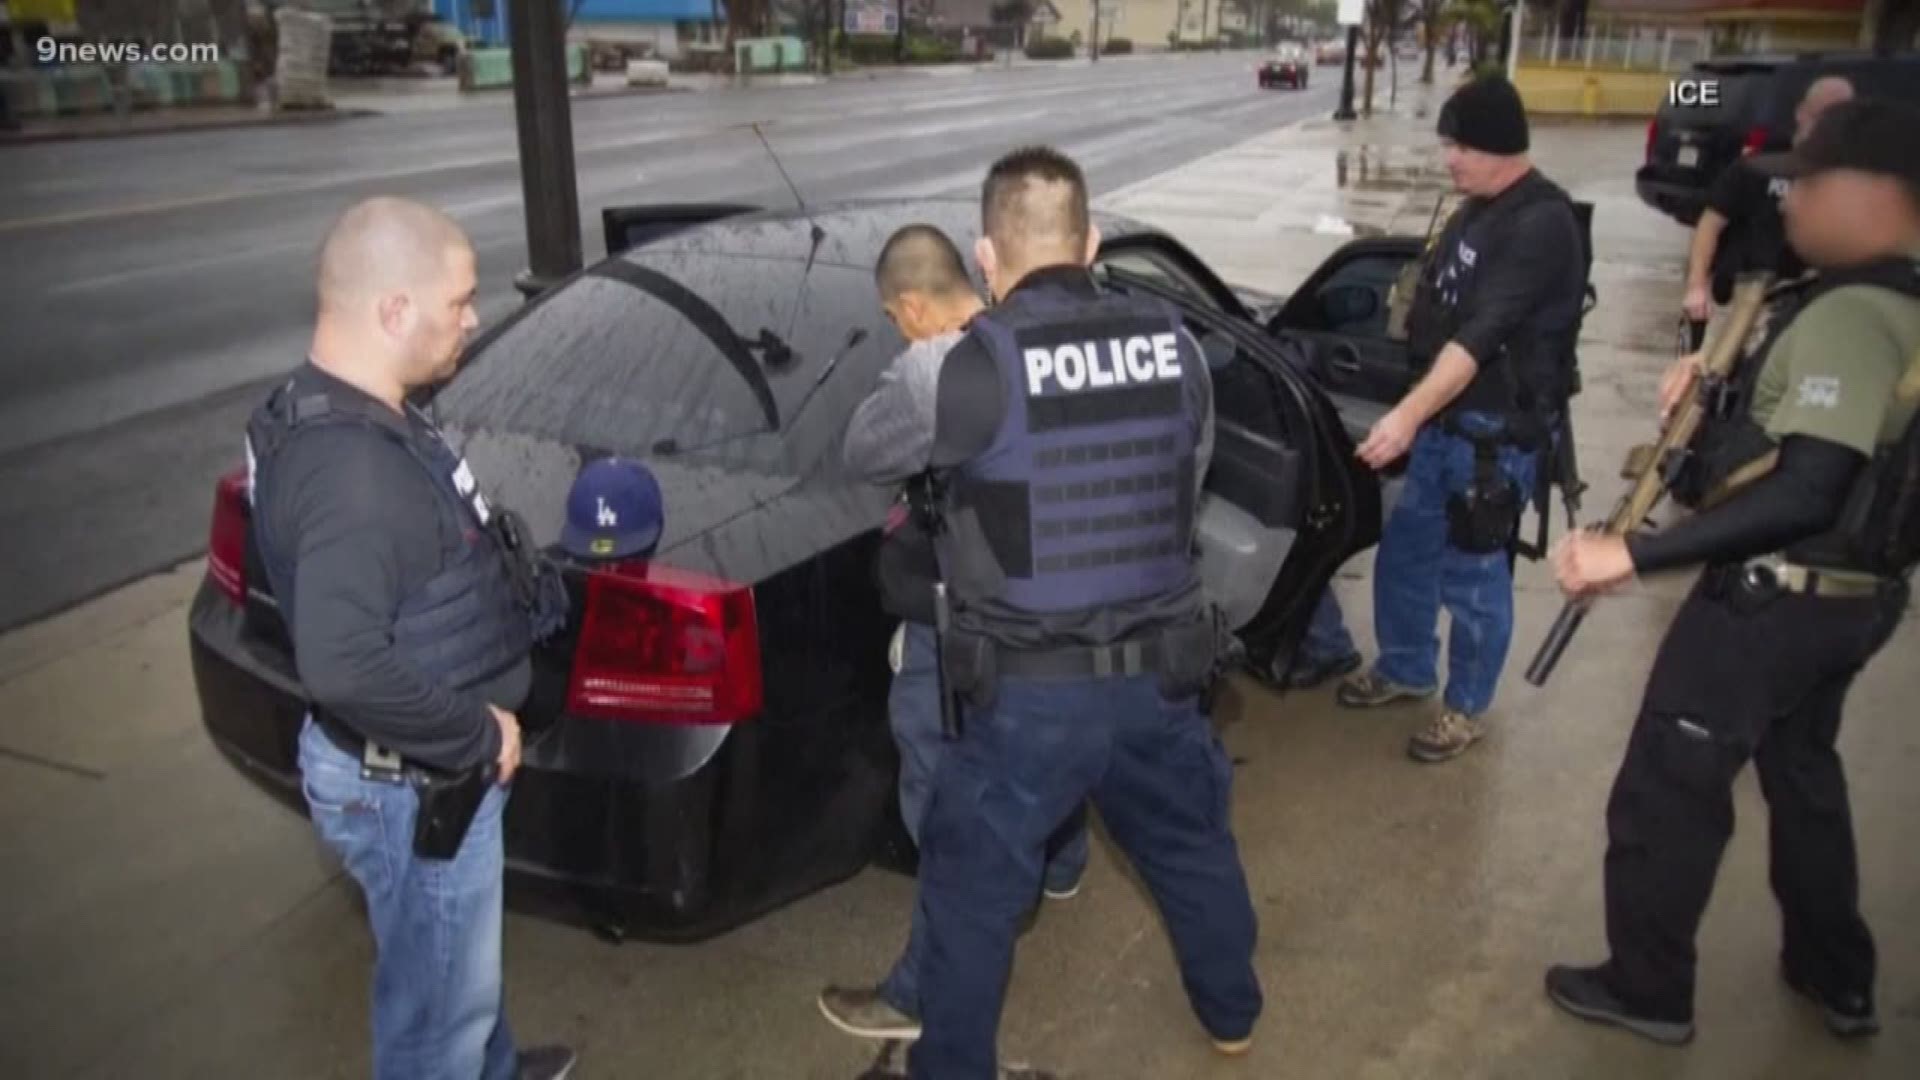 ICE would not confirm if Denver was among the cities where the raids will occur, and said in a statement that was due to the safety of personnel.